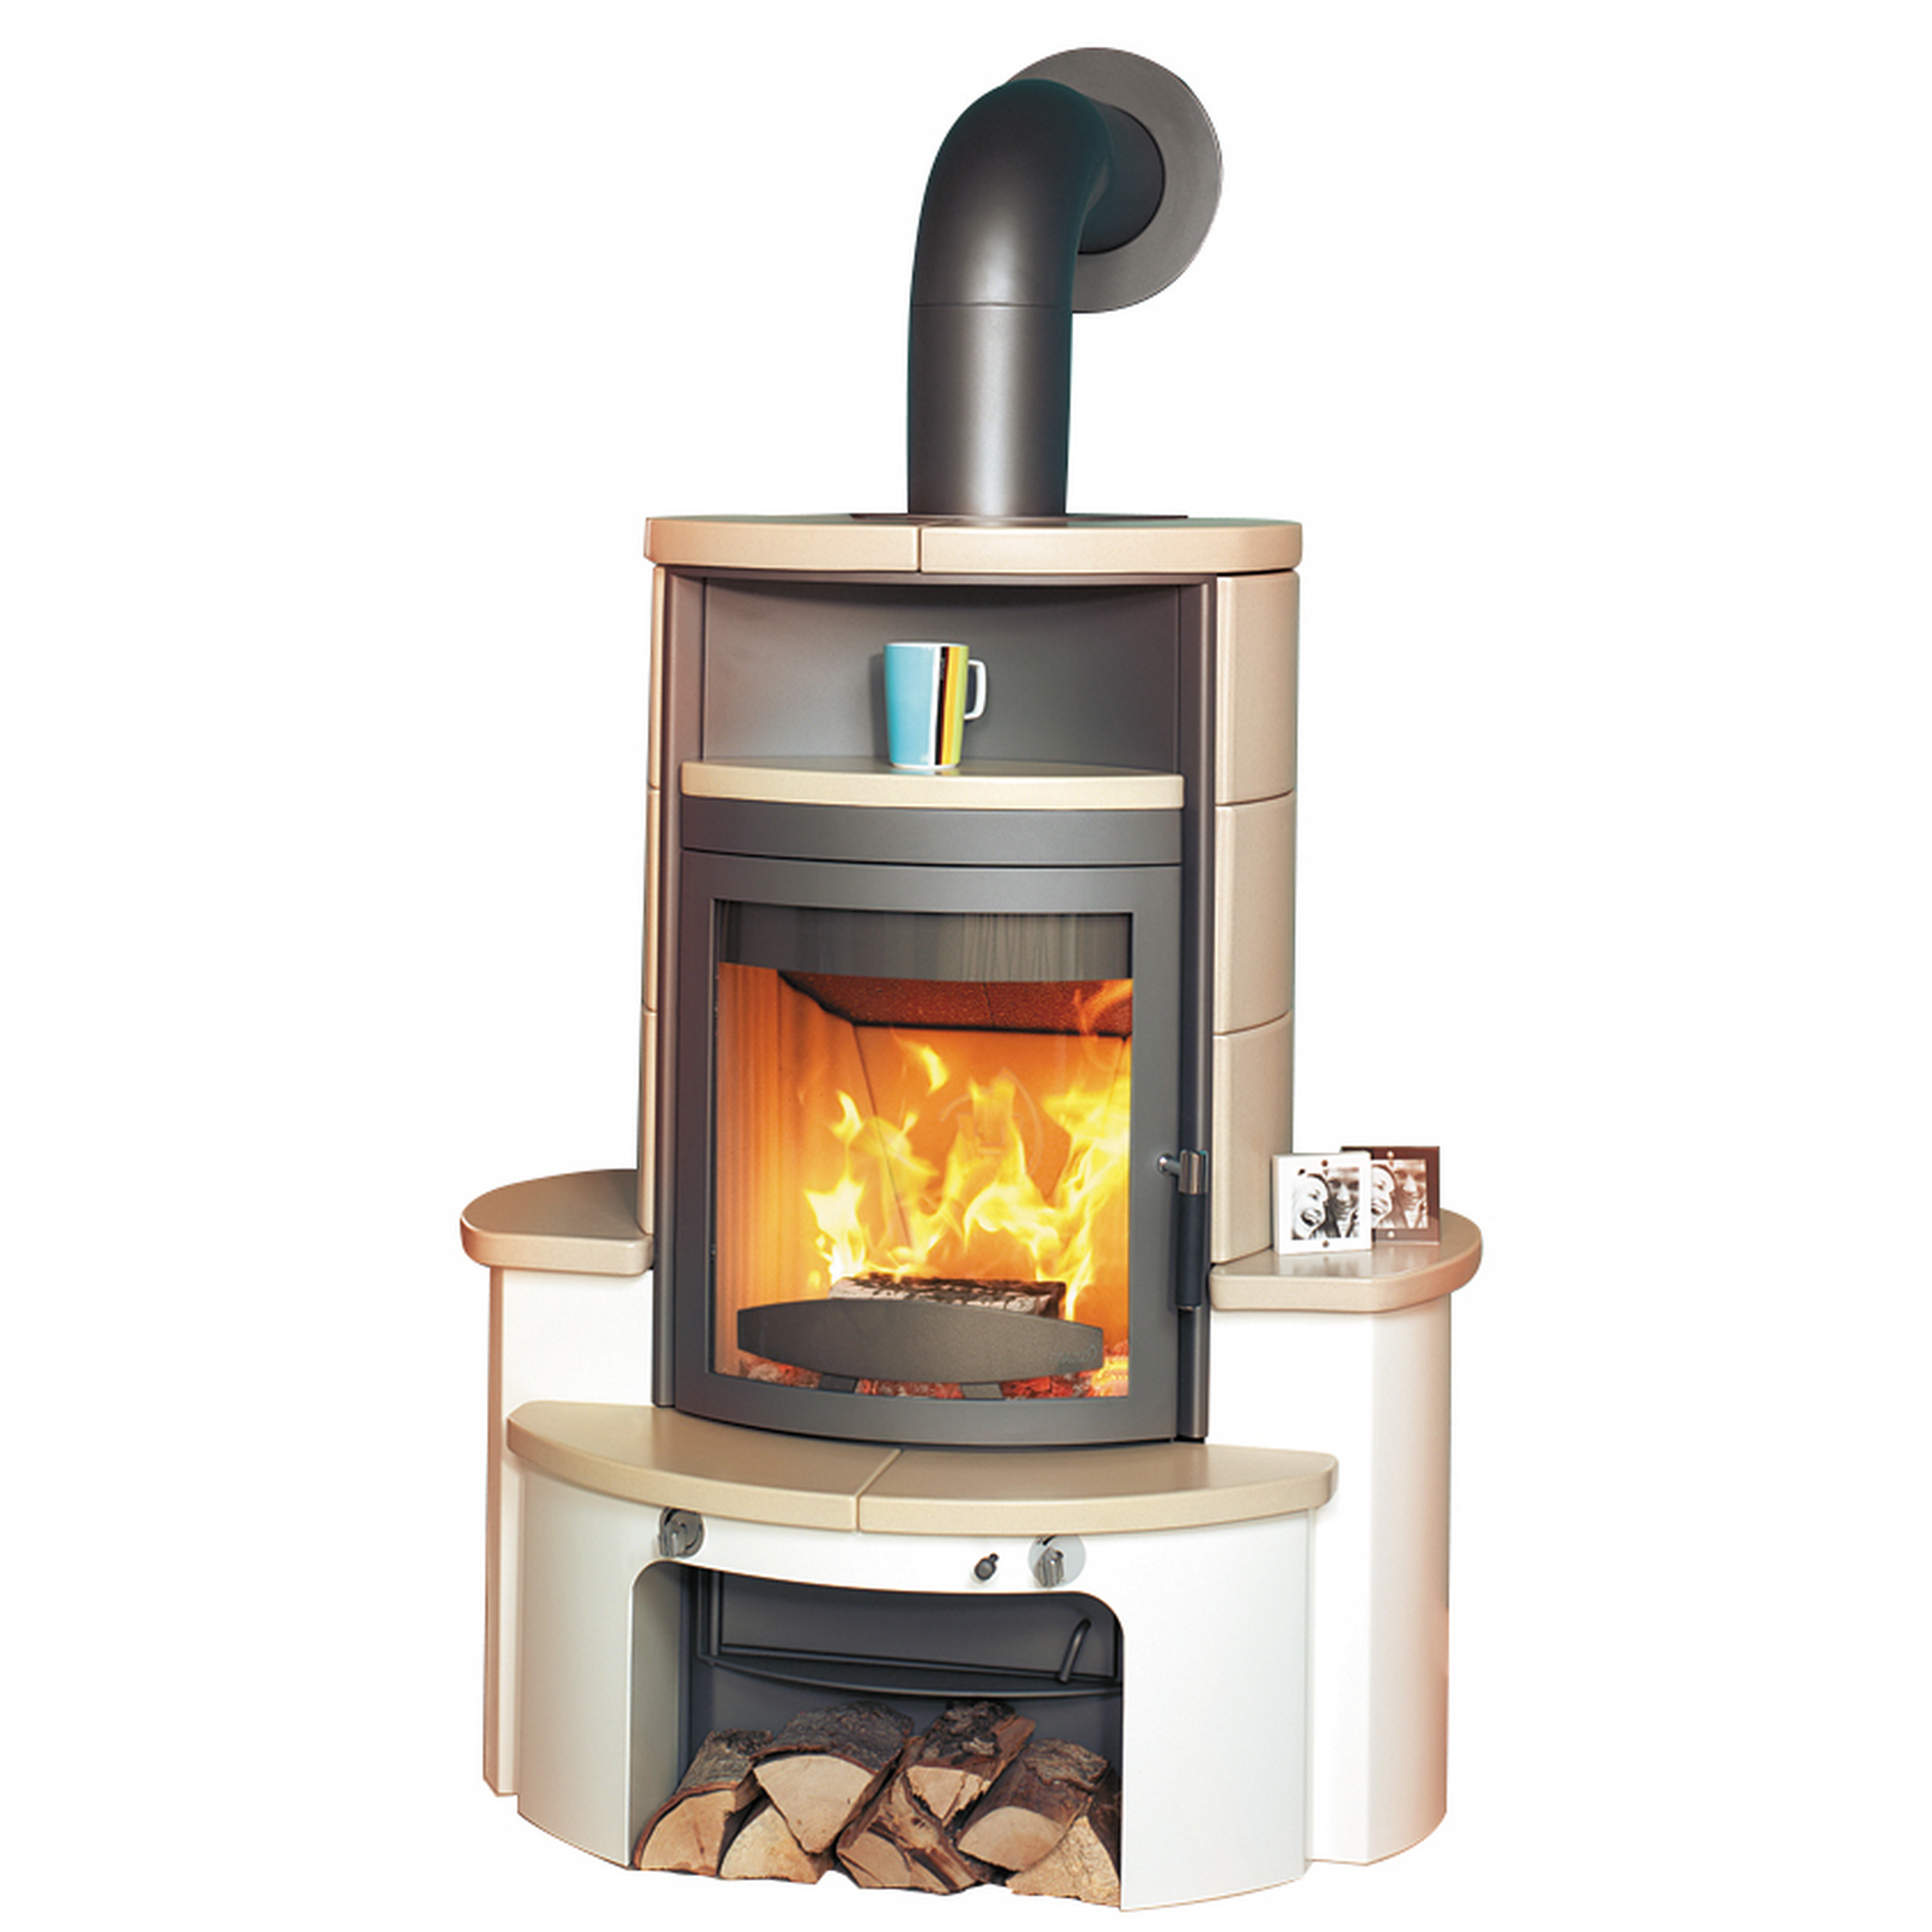 Kaminofen 'Avenso GT ECOplus' titan/creme 8 kW + product picture